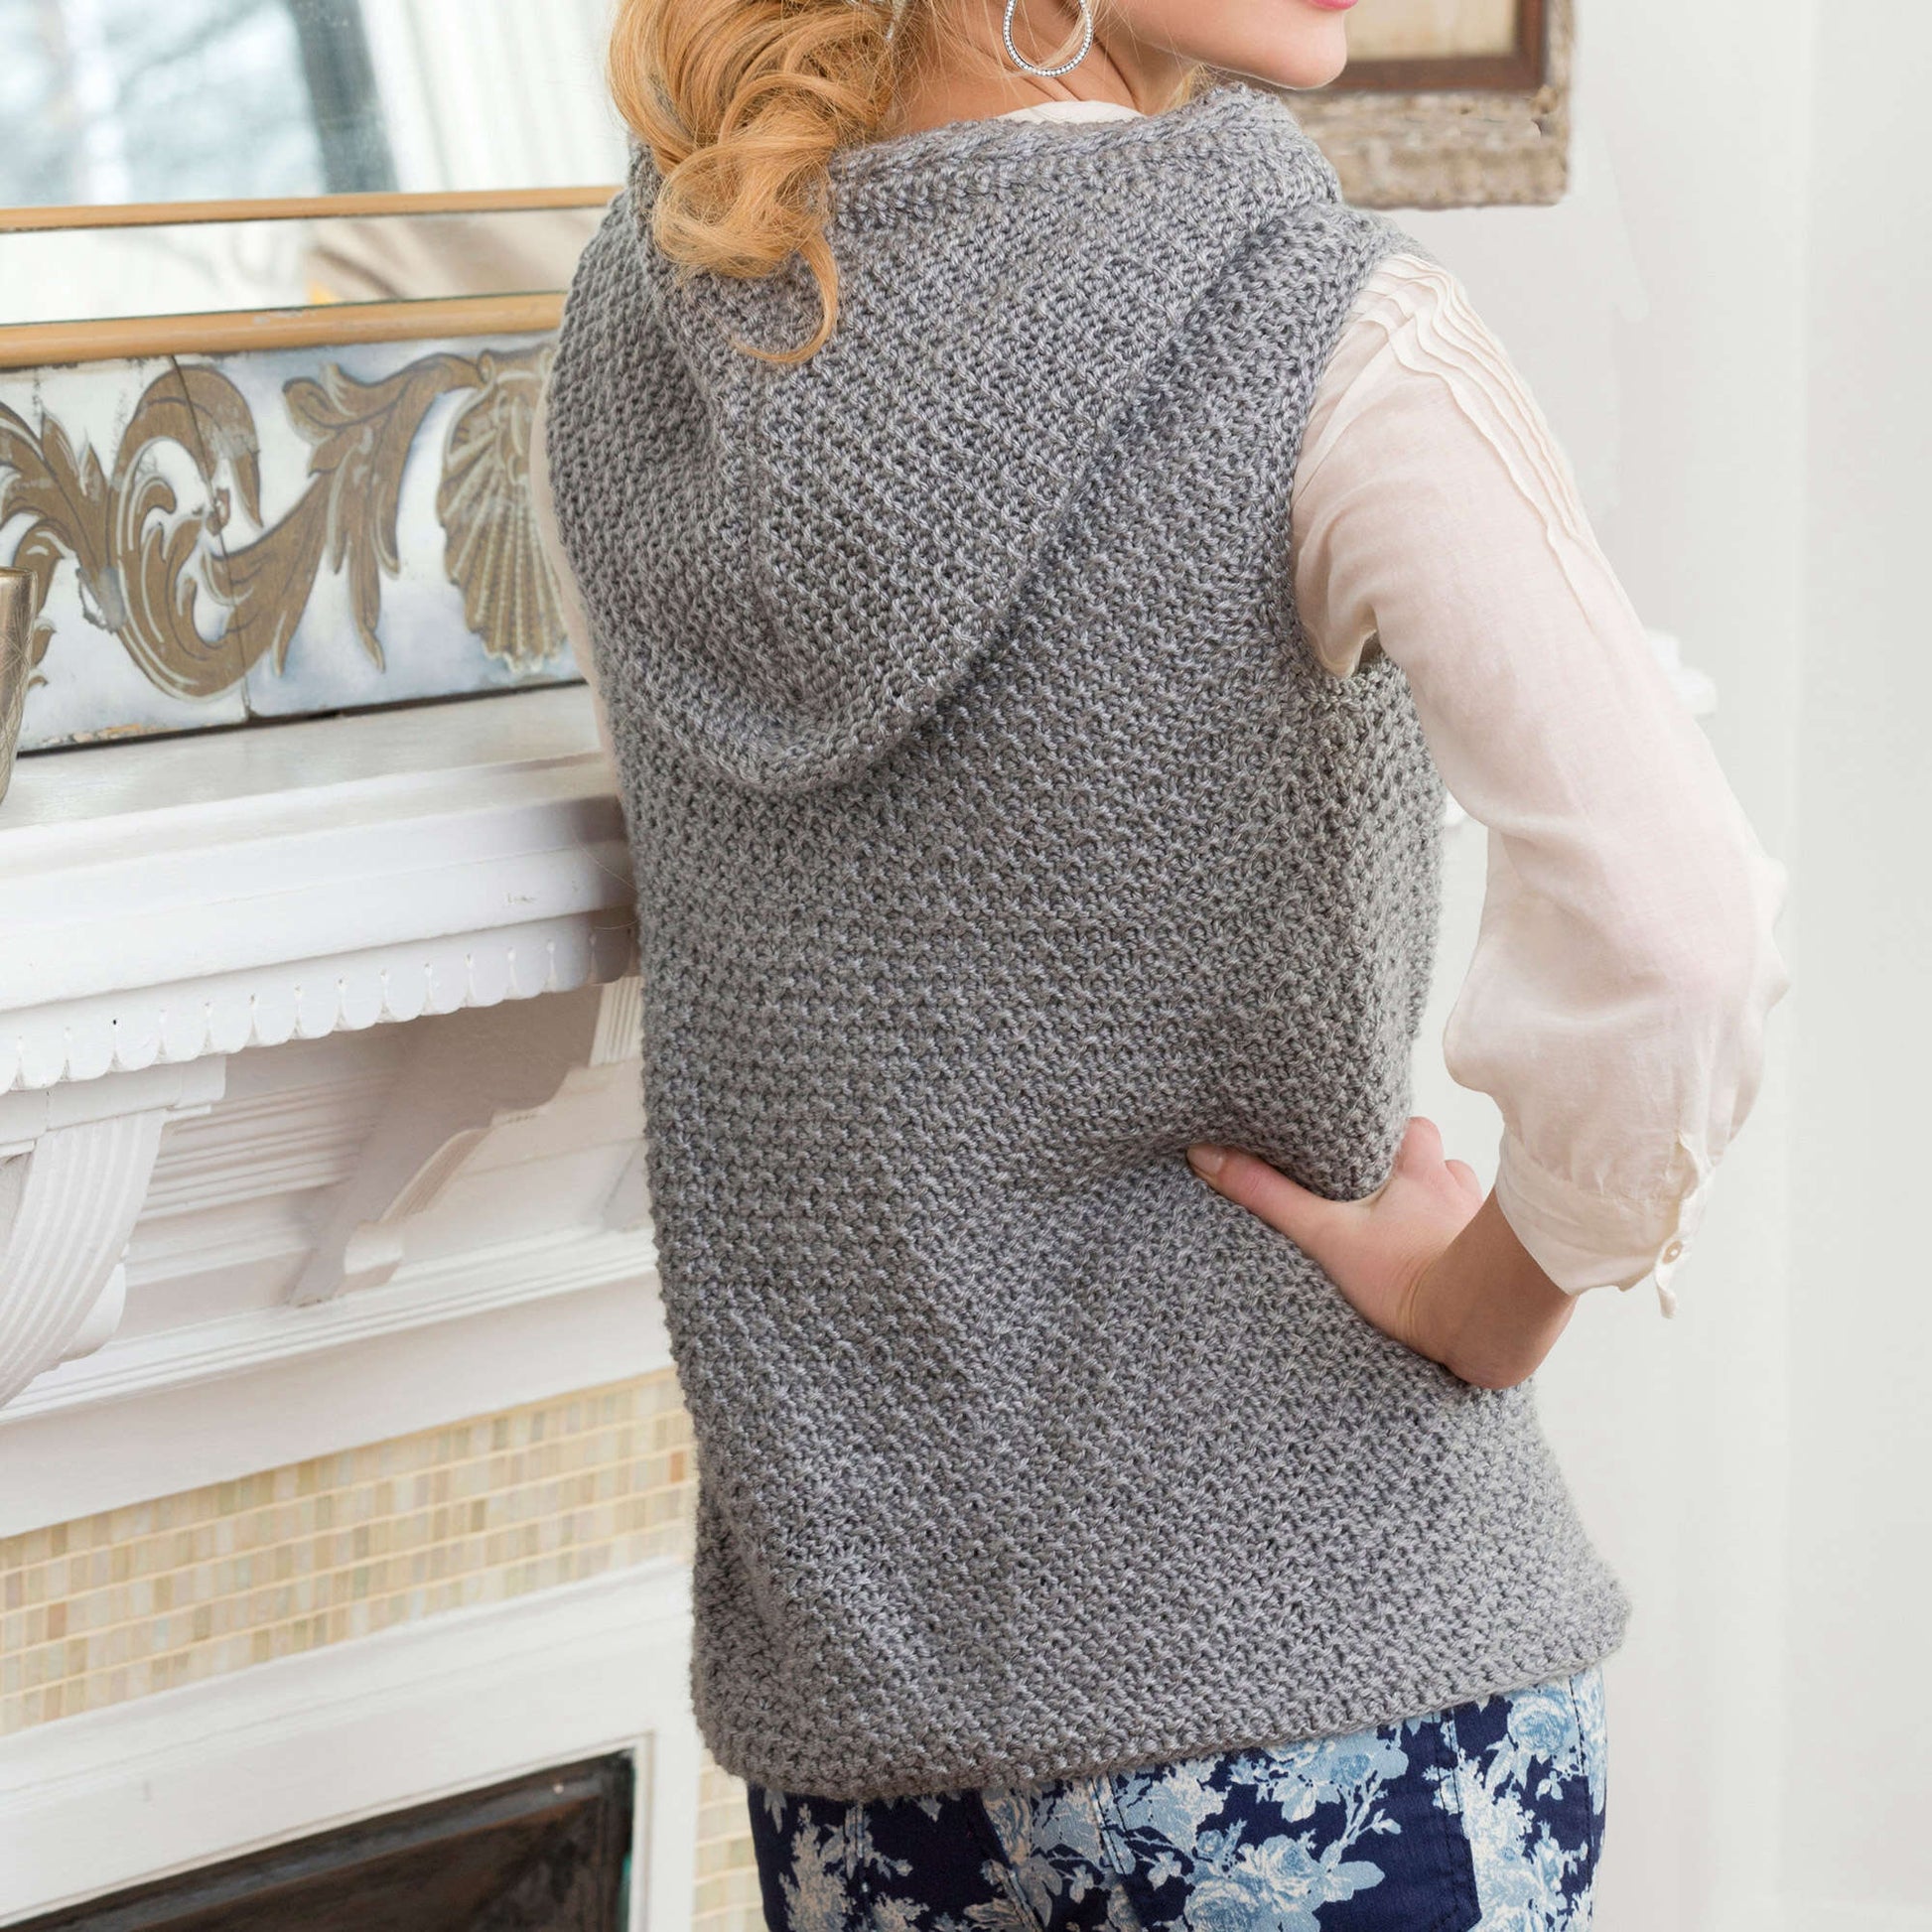 Red Heart Hooded Cable Vest Pattern | Yarnspirations